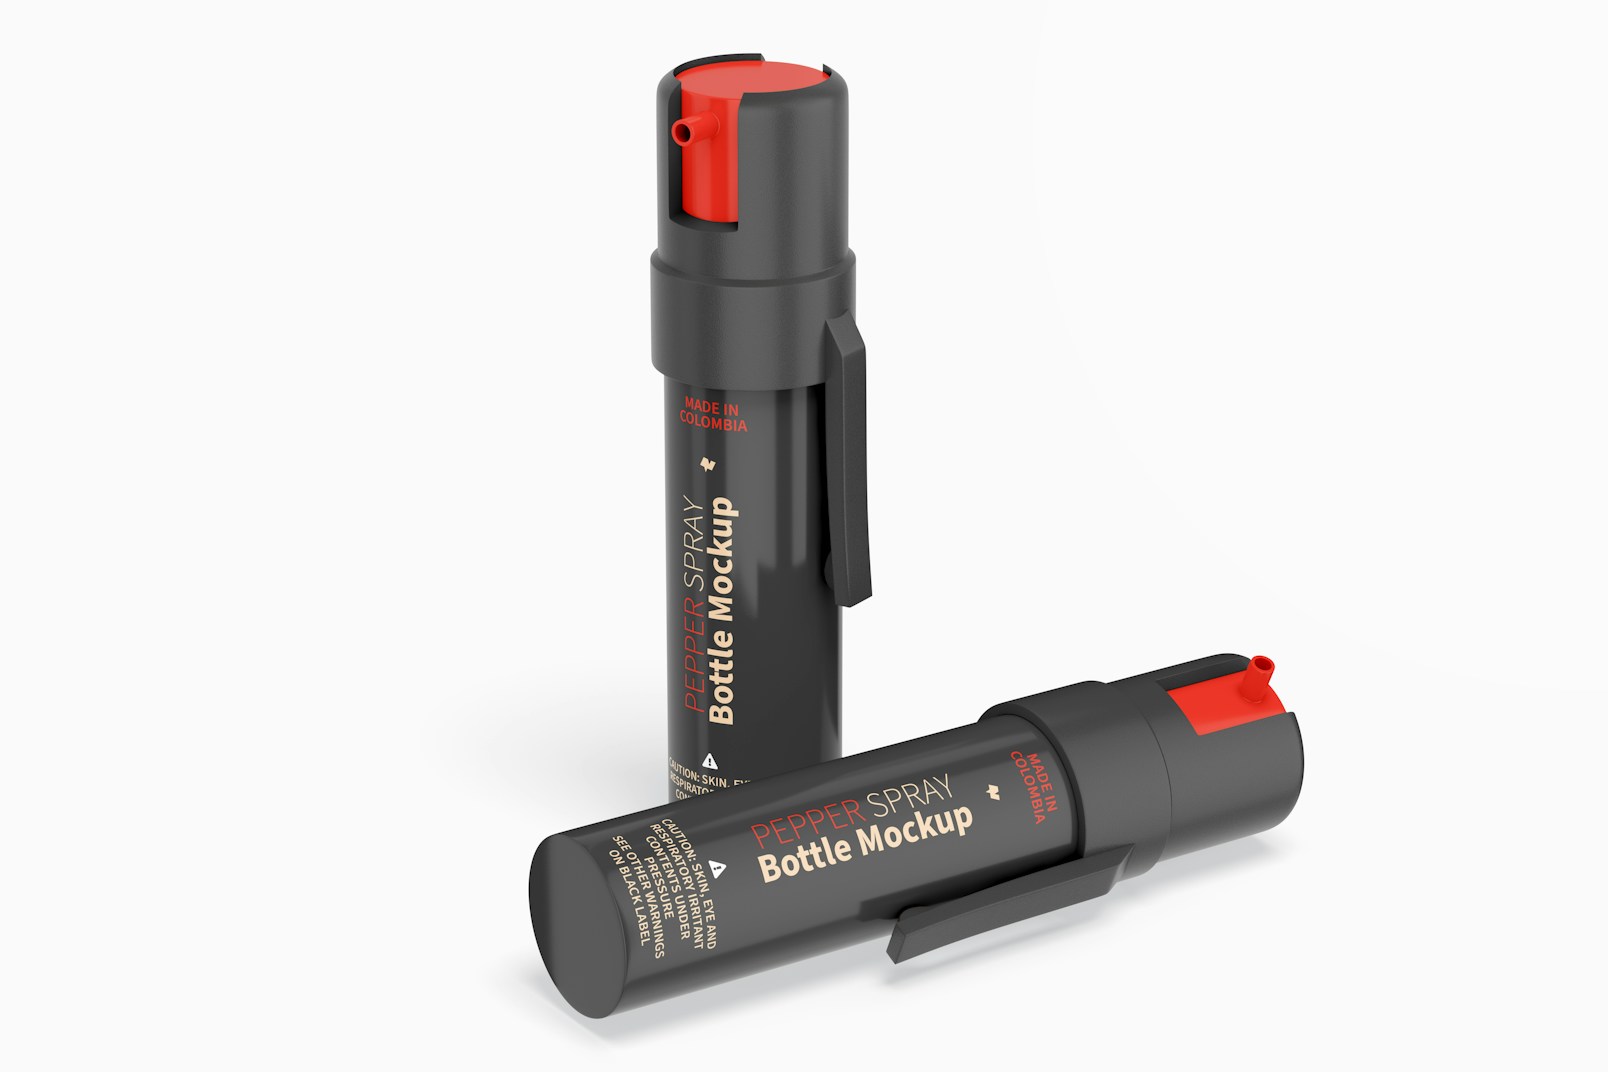 Pepper Spray Bottles Mockup, Standing and Dropped